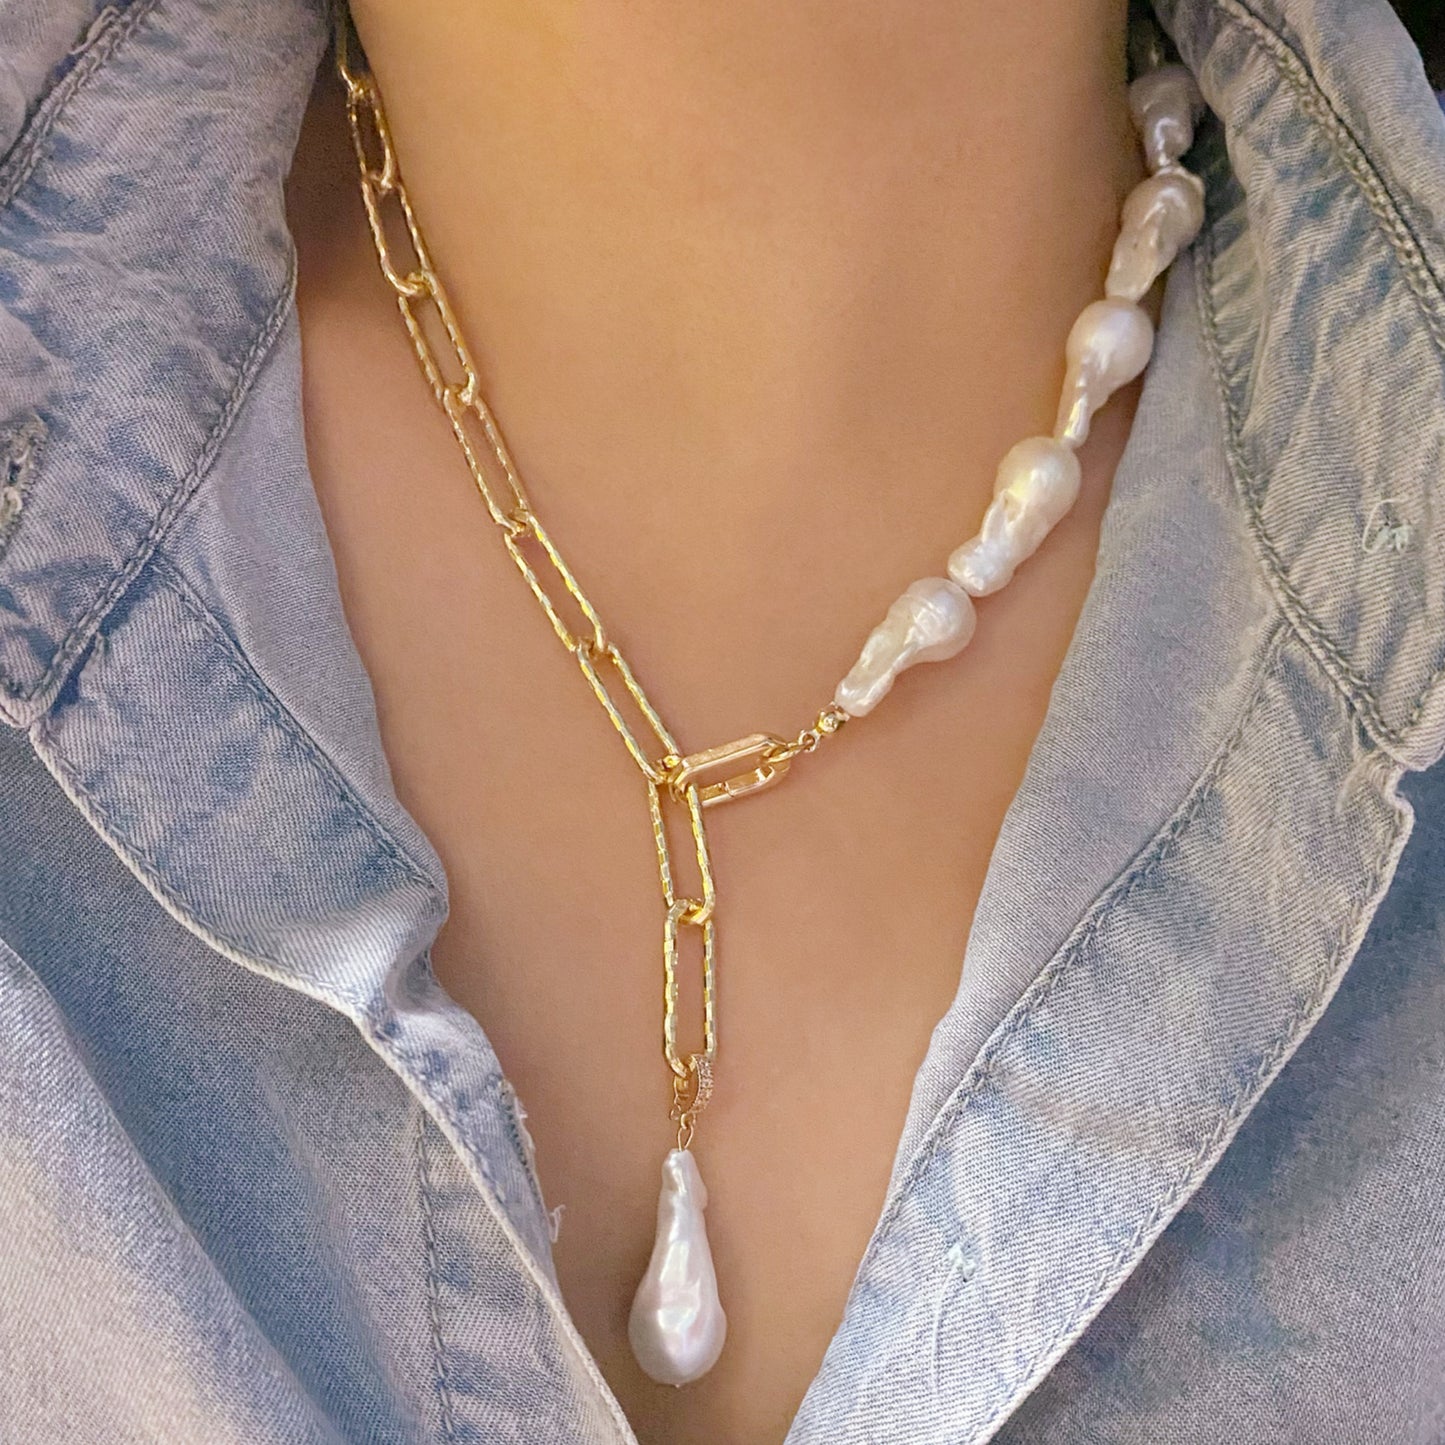 3-Way Baroque Pearls and Chain Necklace